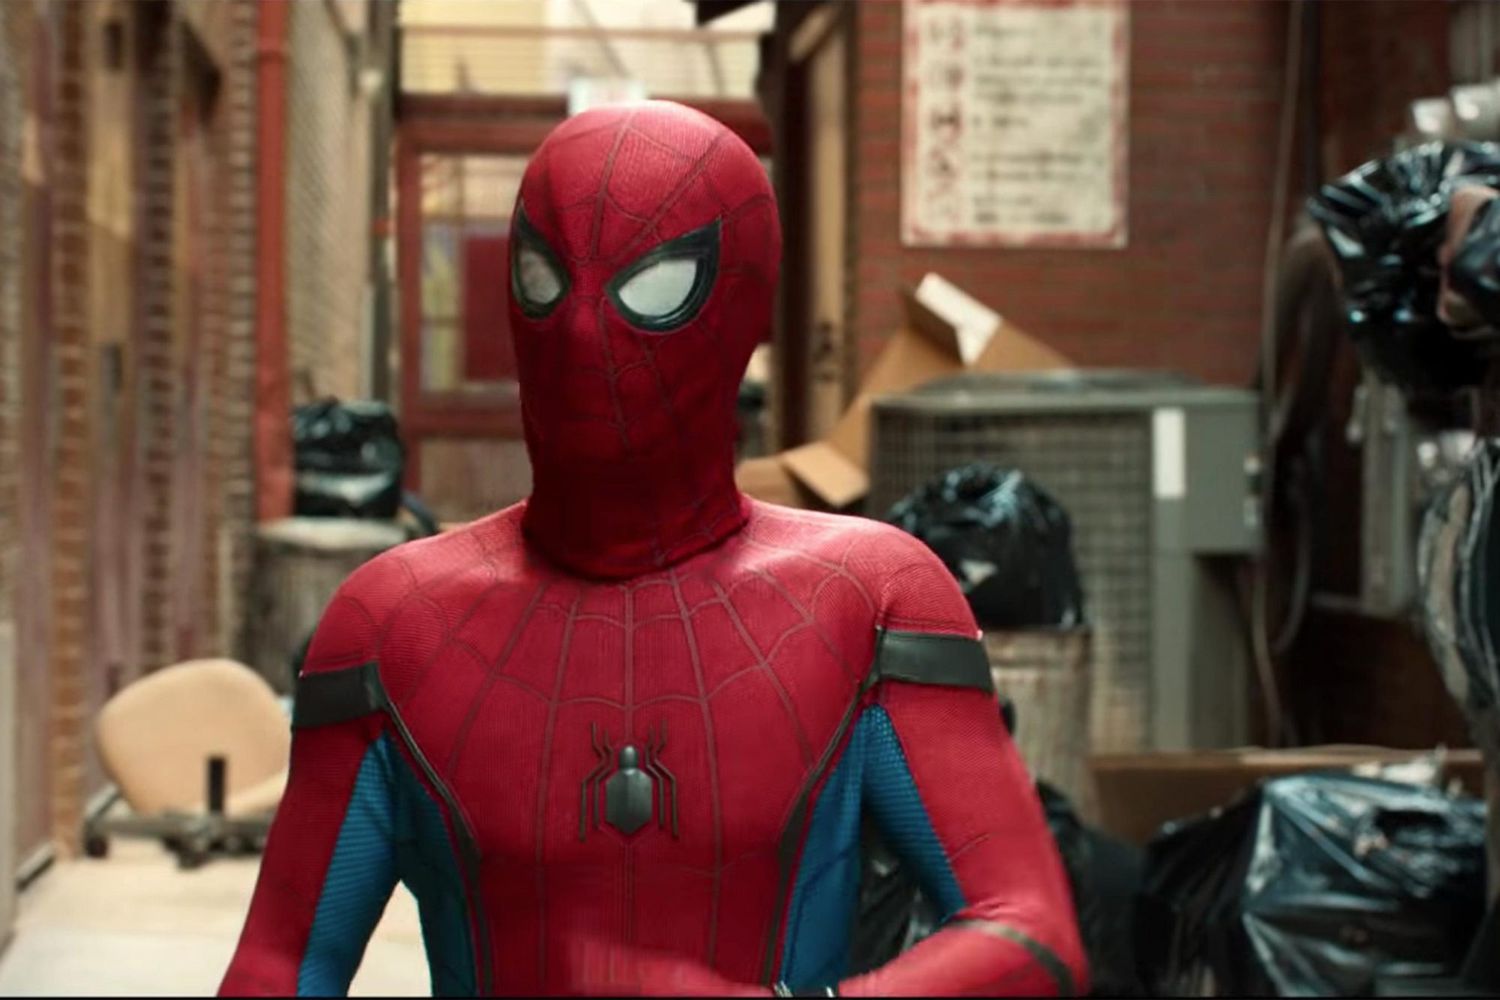 Is Spider-Man 4 Ready to Swing into Action? Tom Holland and New Directors Spark Major Buzz